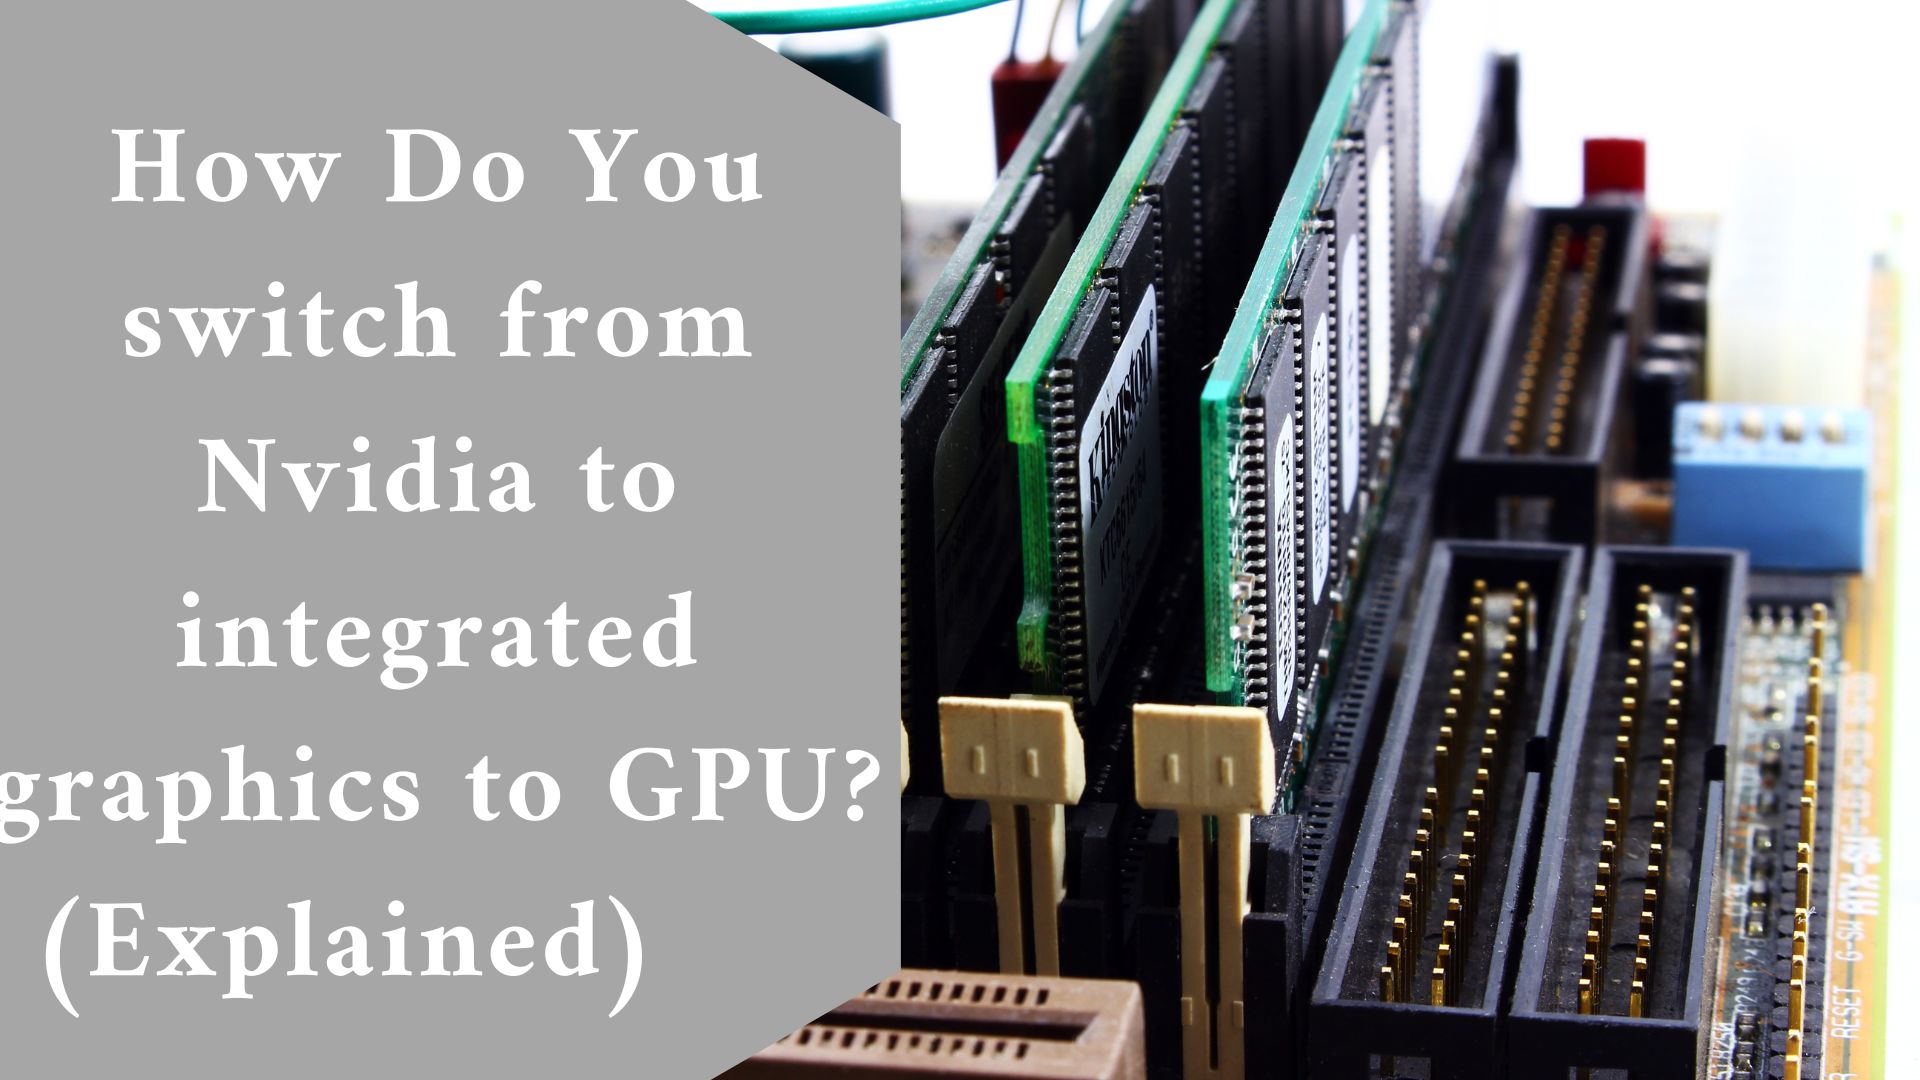 How Do You switch from Nvidia to integrated graphics to GPU? (Explained)